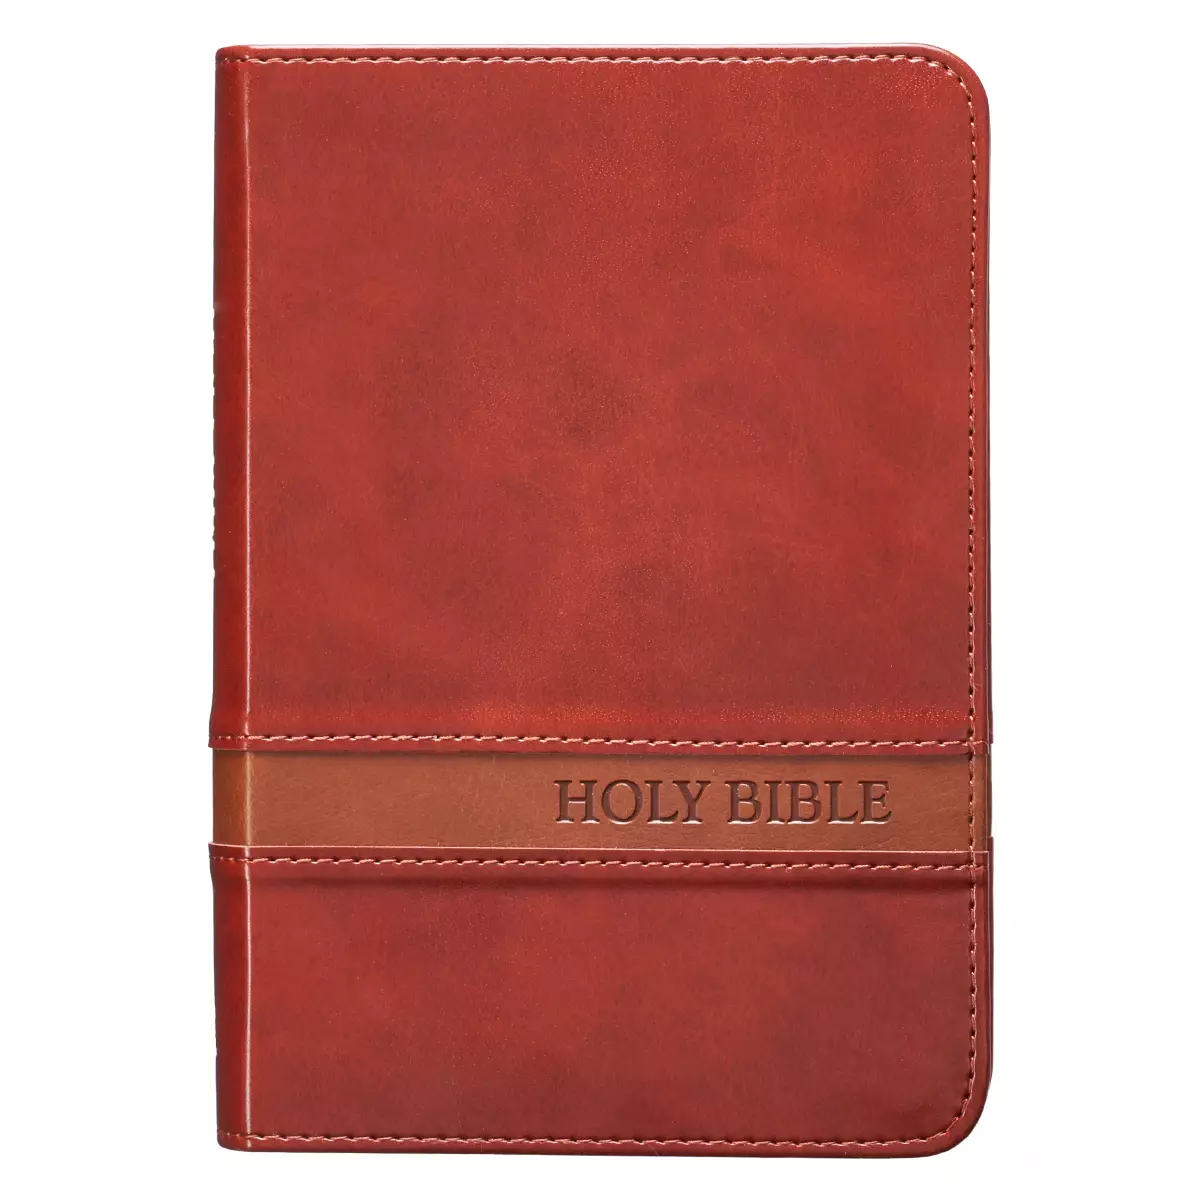 KJV Compact Large Print Imitation Leather Brown, Ribbon Marker, Words of Christ in Red, Maps